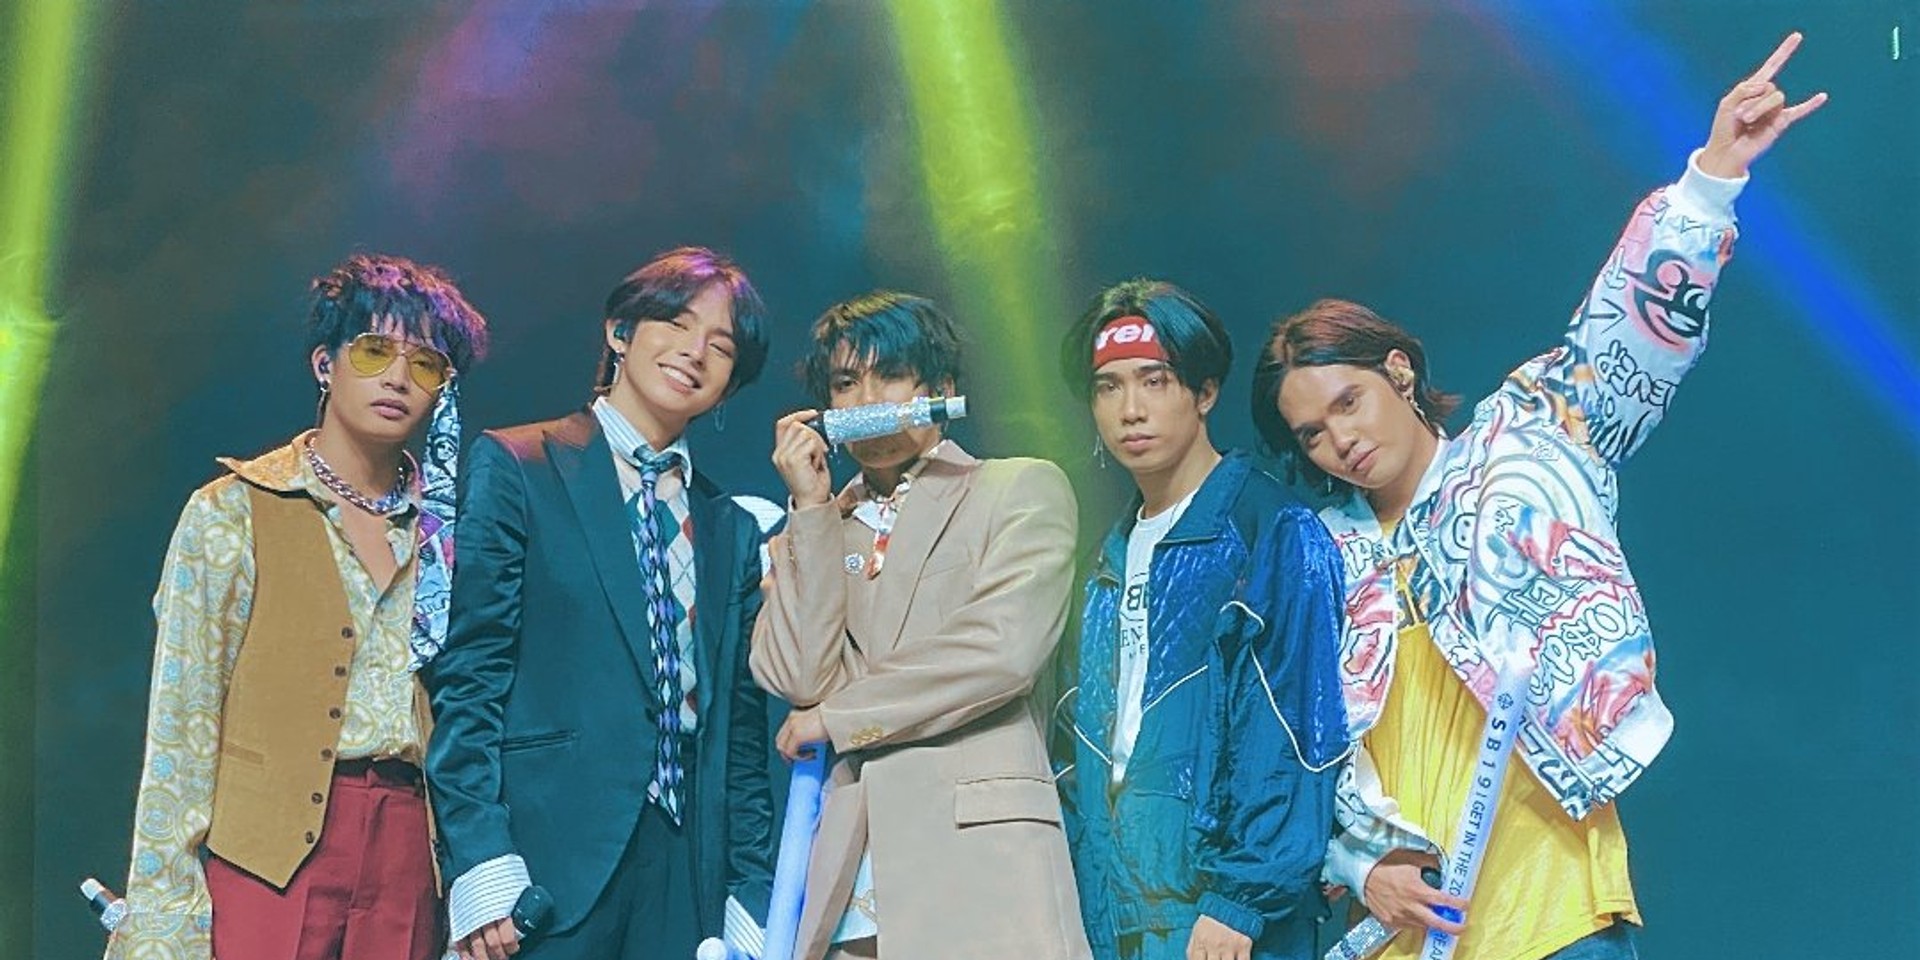 "Unstoppable force kami pag kasama namin ang A'TIN. " SB19 surprise fans with energetic performances in their first-ever online concert  - gig report